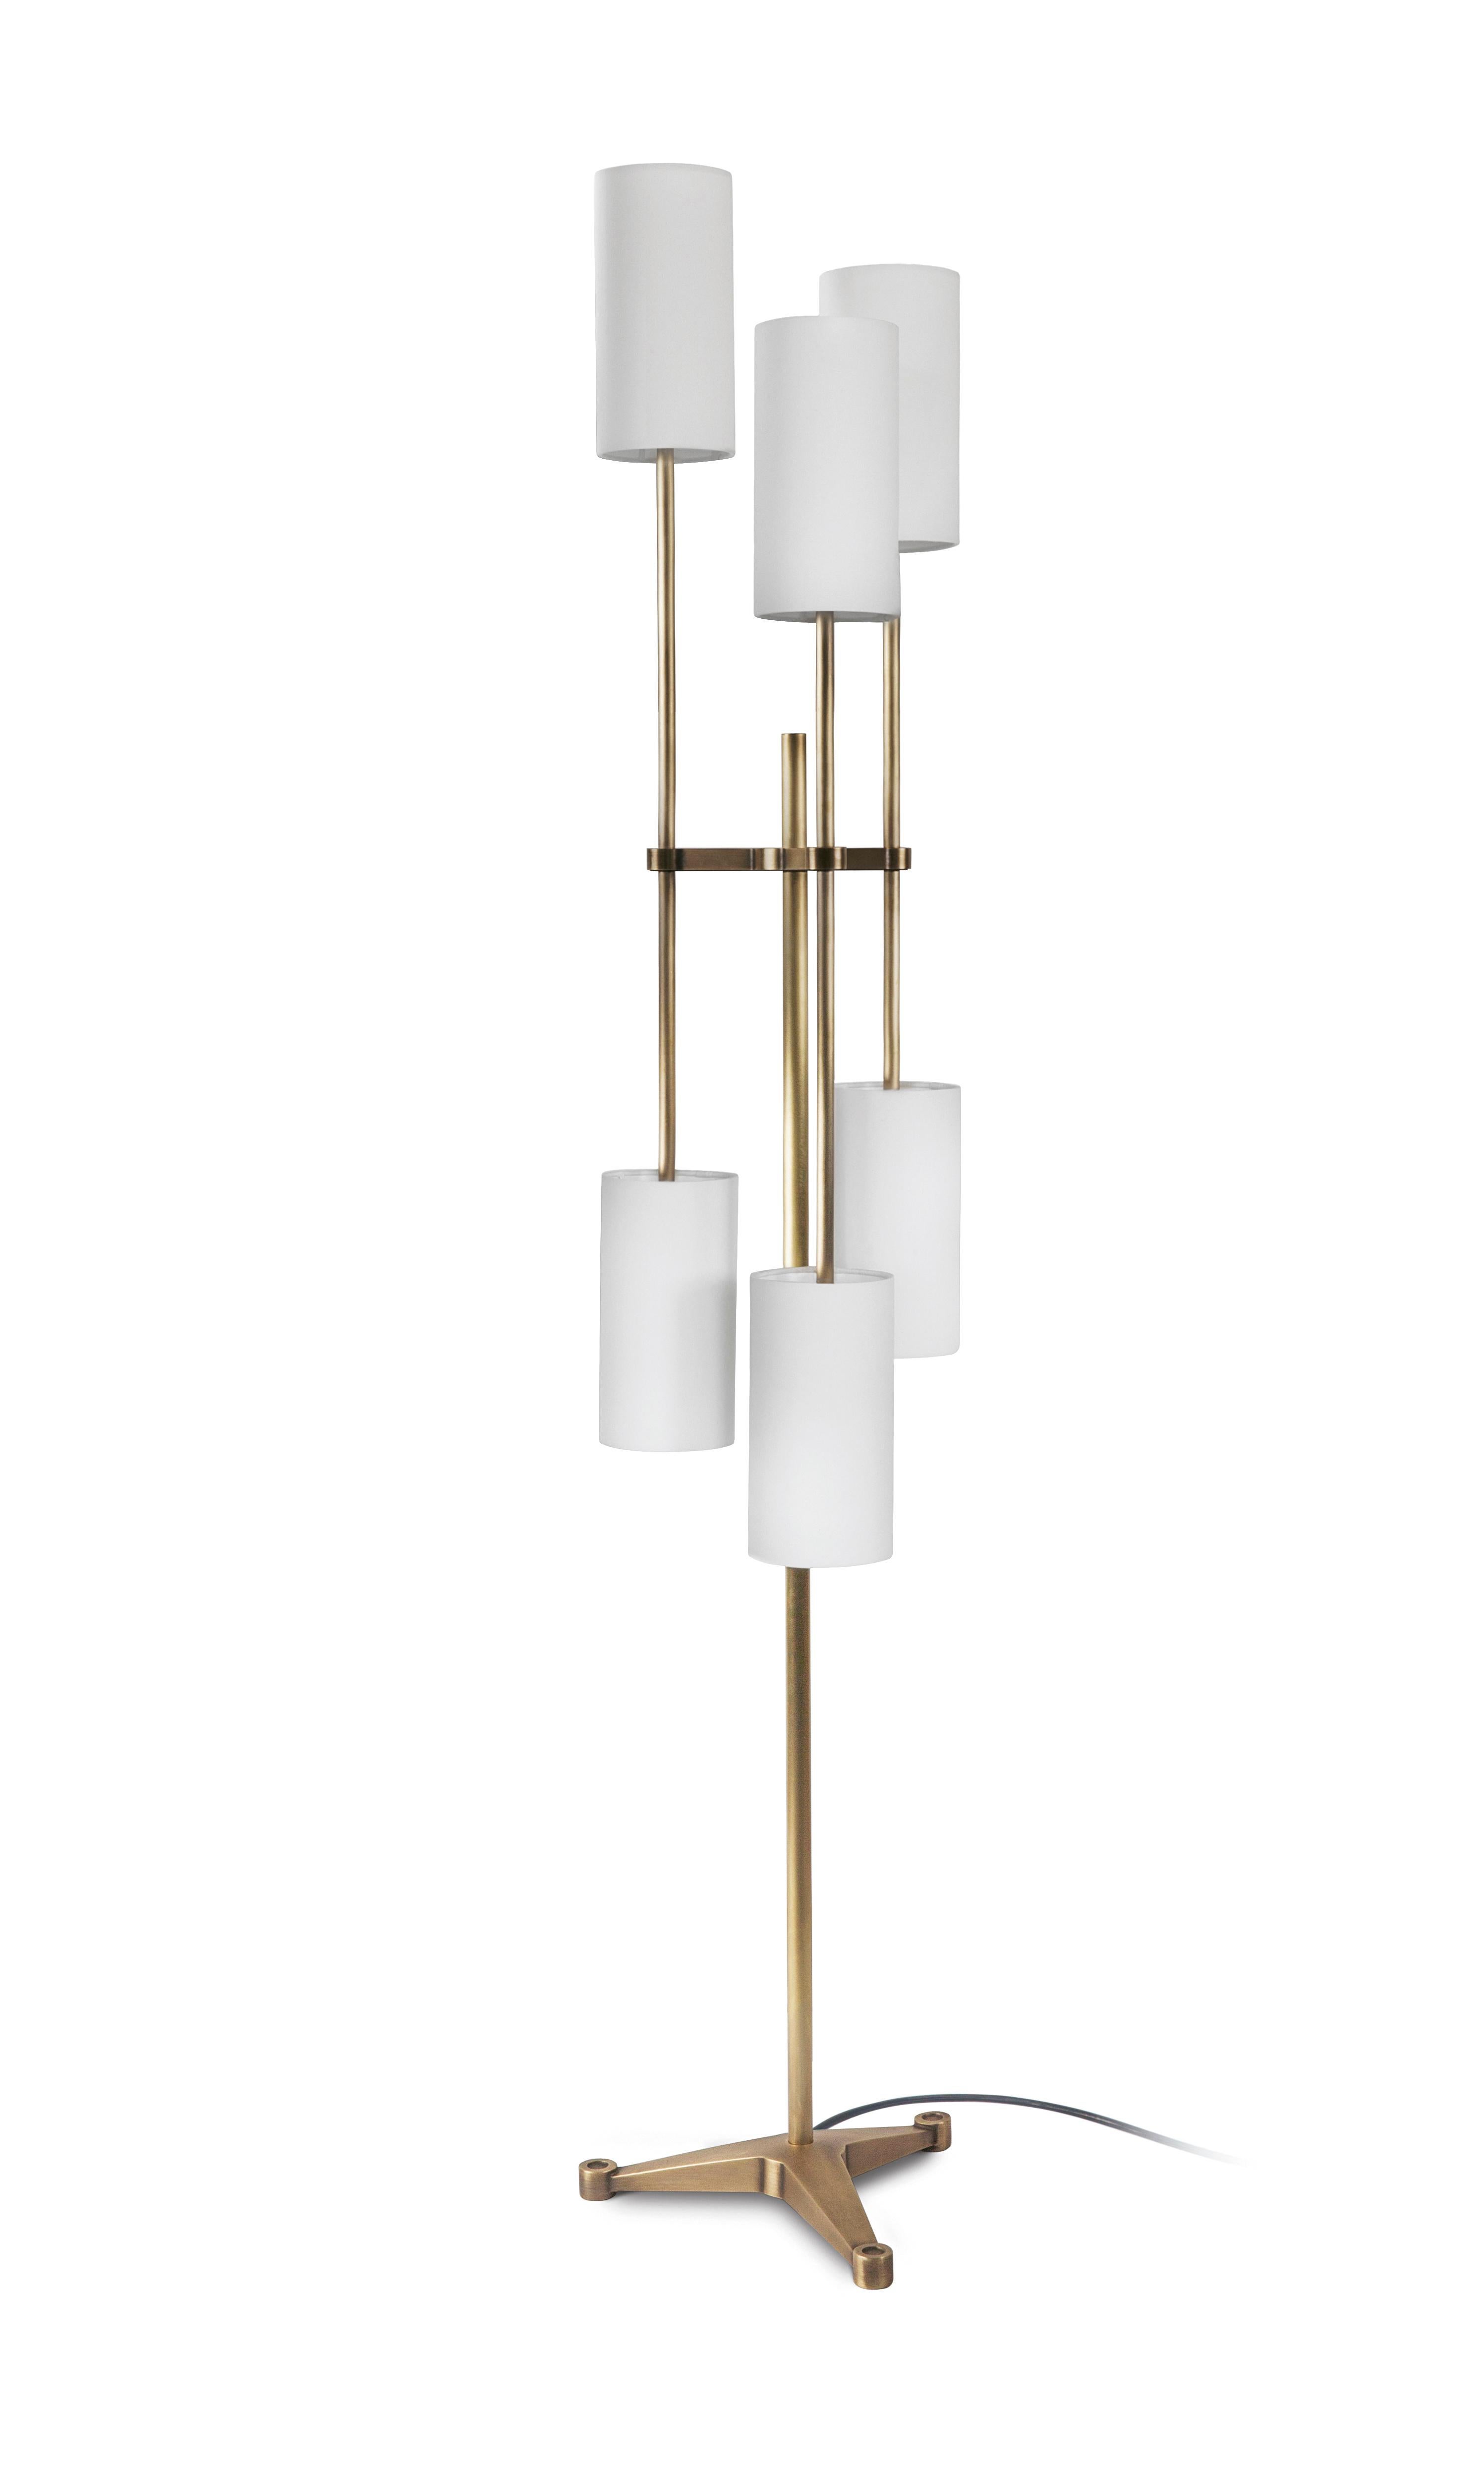 Pugil floor lamp by Bert Frank
Dimensions: 147.5 x 30 x 30 cm
Materials: Brass, fabric

When Adam Yeats and Robbie Llewellyn founded Bert Frank in 2013 it was a meeting of minds and the start of a collaborative creative partnership with engineering